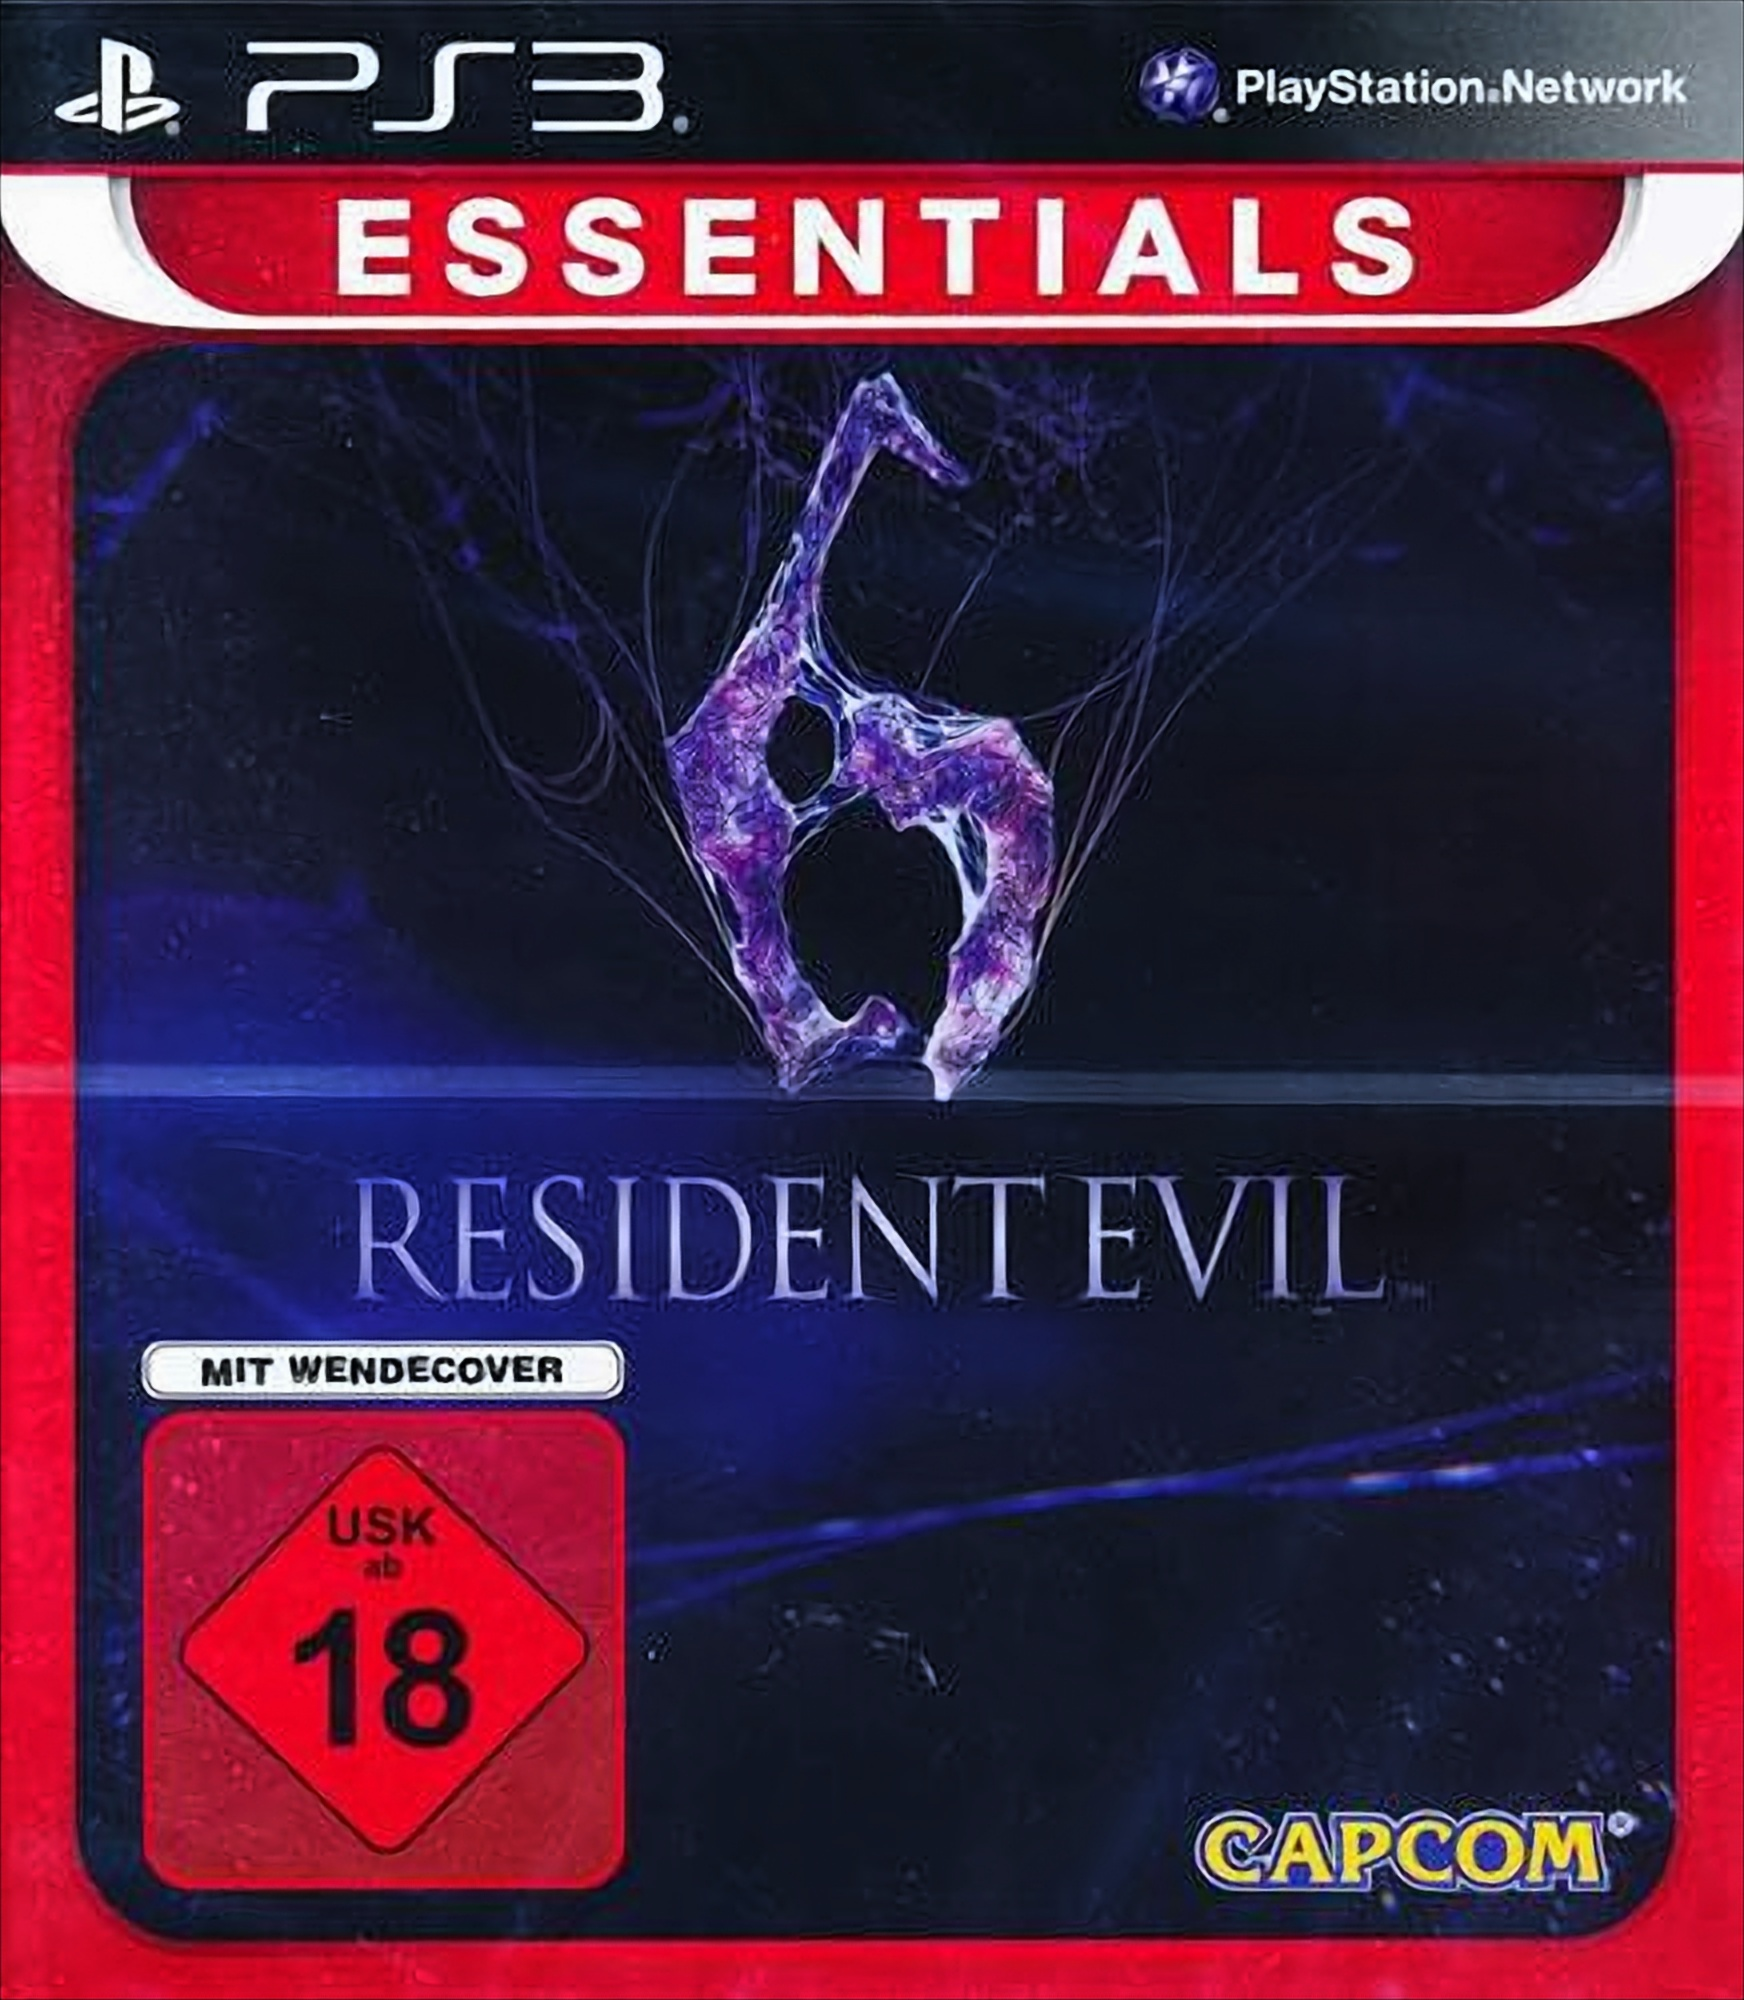 NEUAUFLAGE Essentials 6 - 3] PS-3 [PlayStation Resident Evil